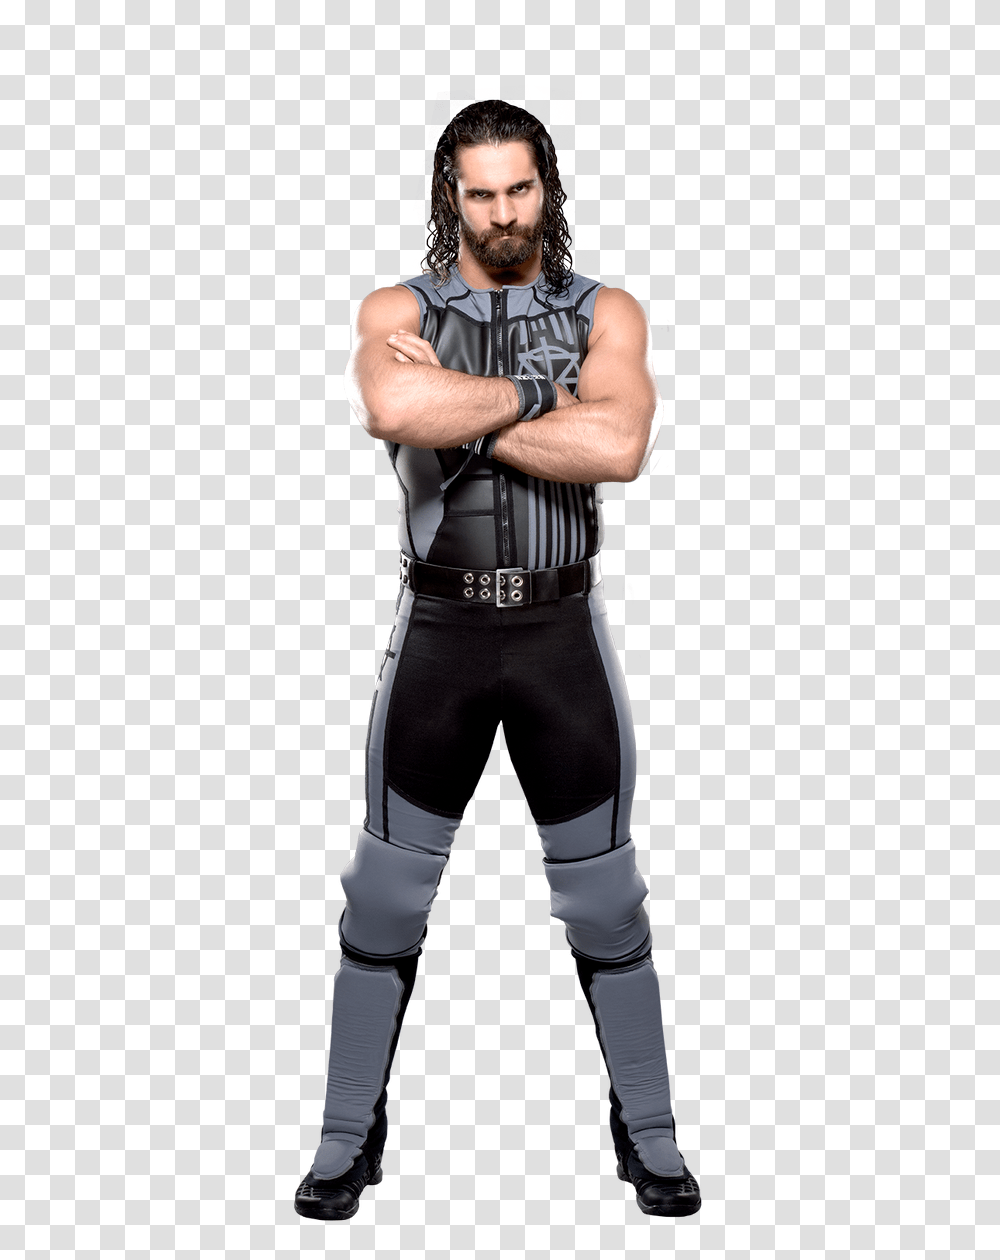 He Hates Roman Reigns So I Hate Him Wwe Seth, Person, Human, Costume Transparent Png